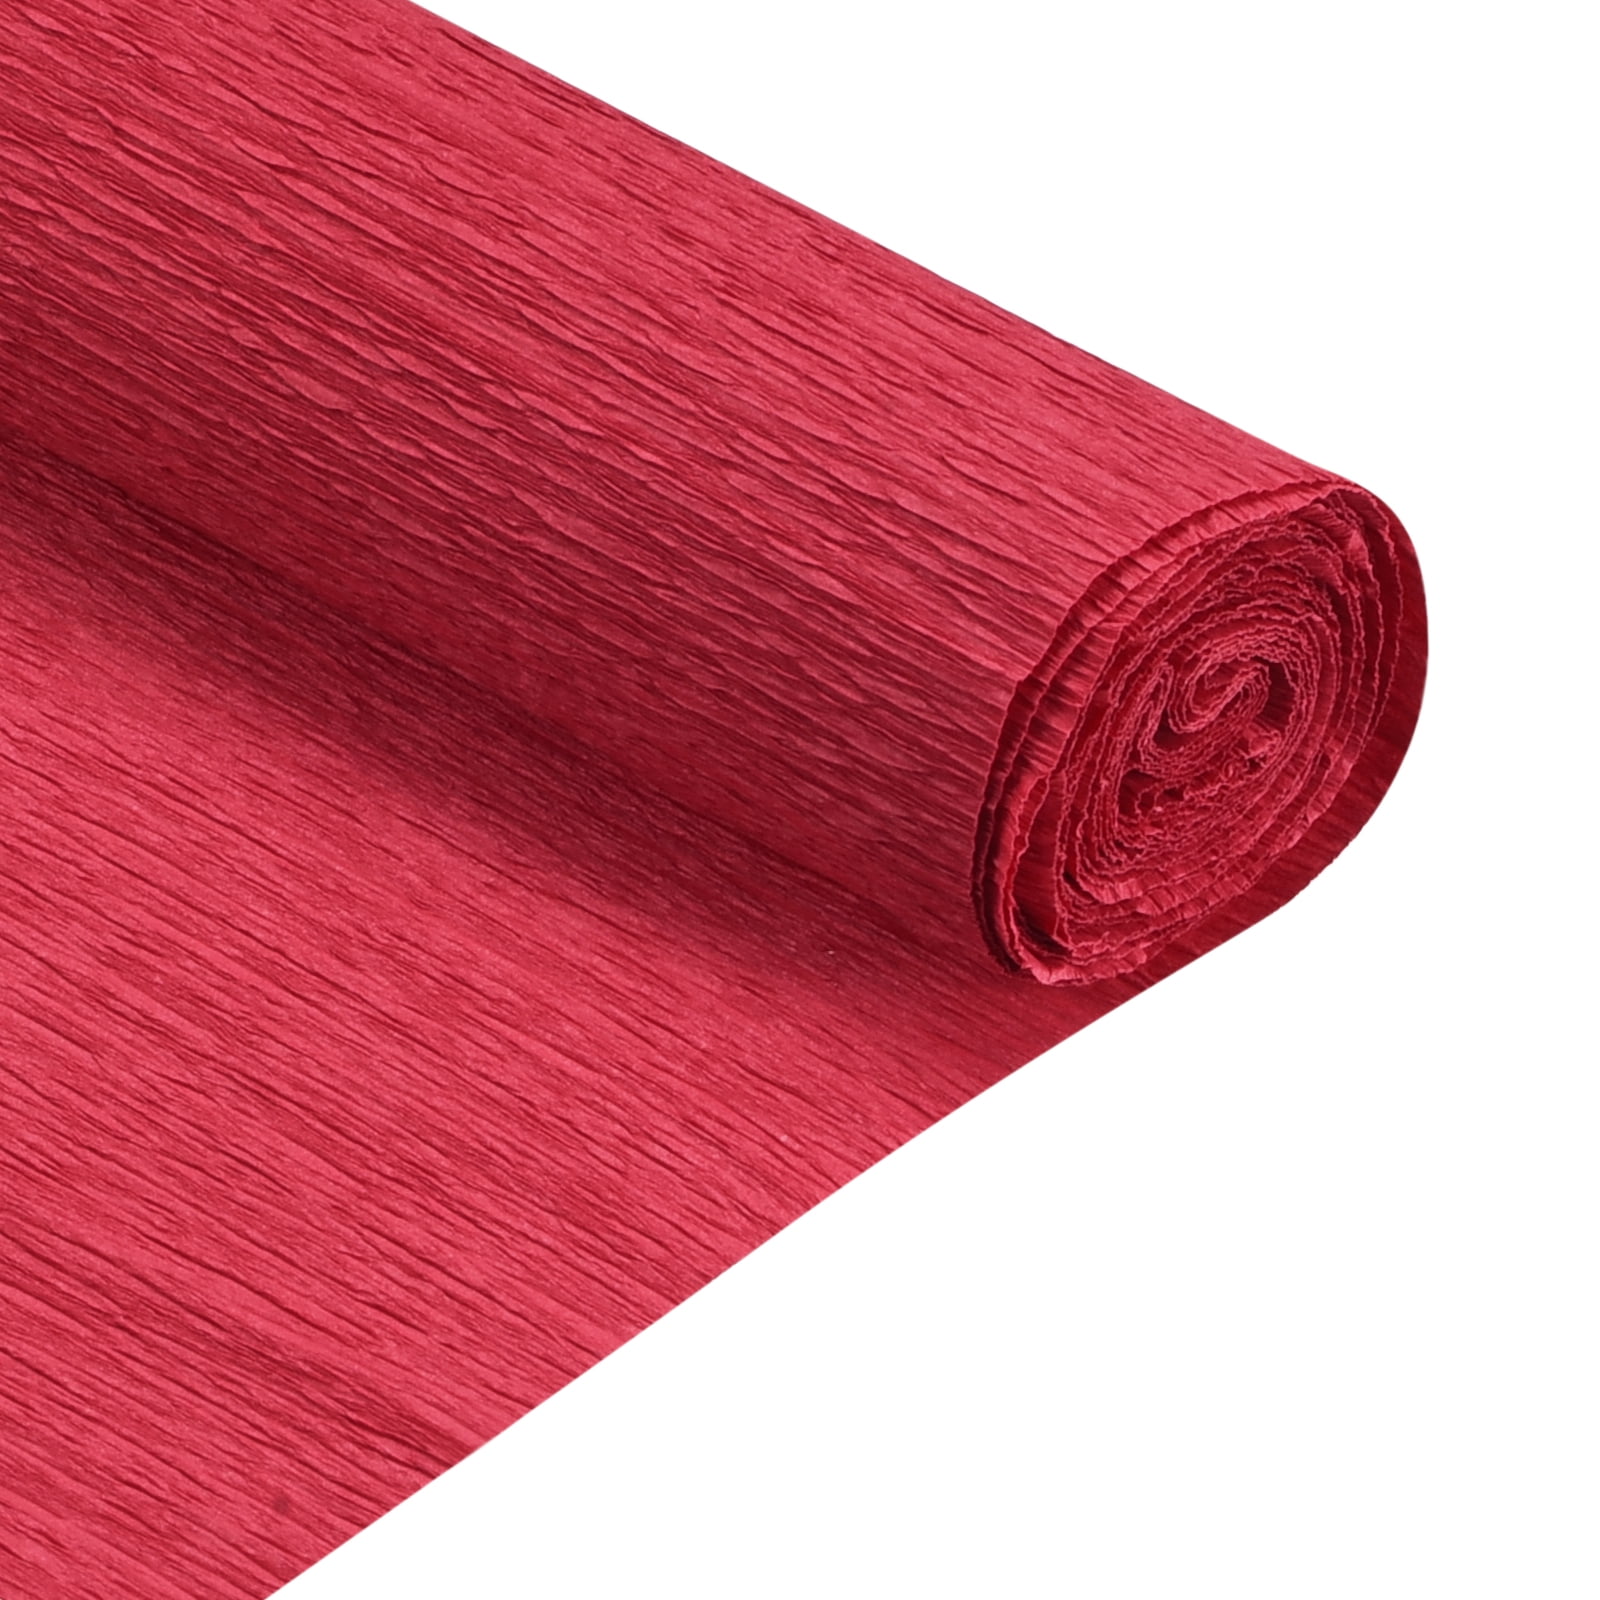 Crepe Paper roll 180g (20in Wide x 8ft Long) Gradient Pink (shade 600/4)